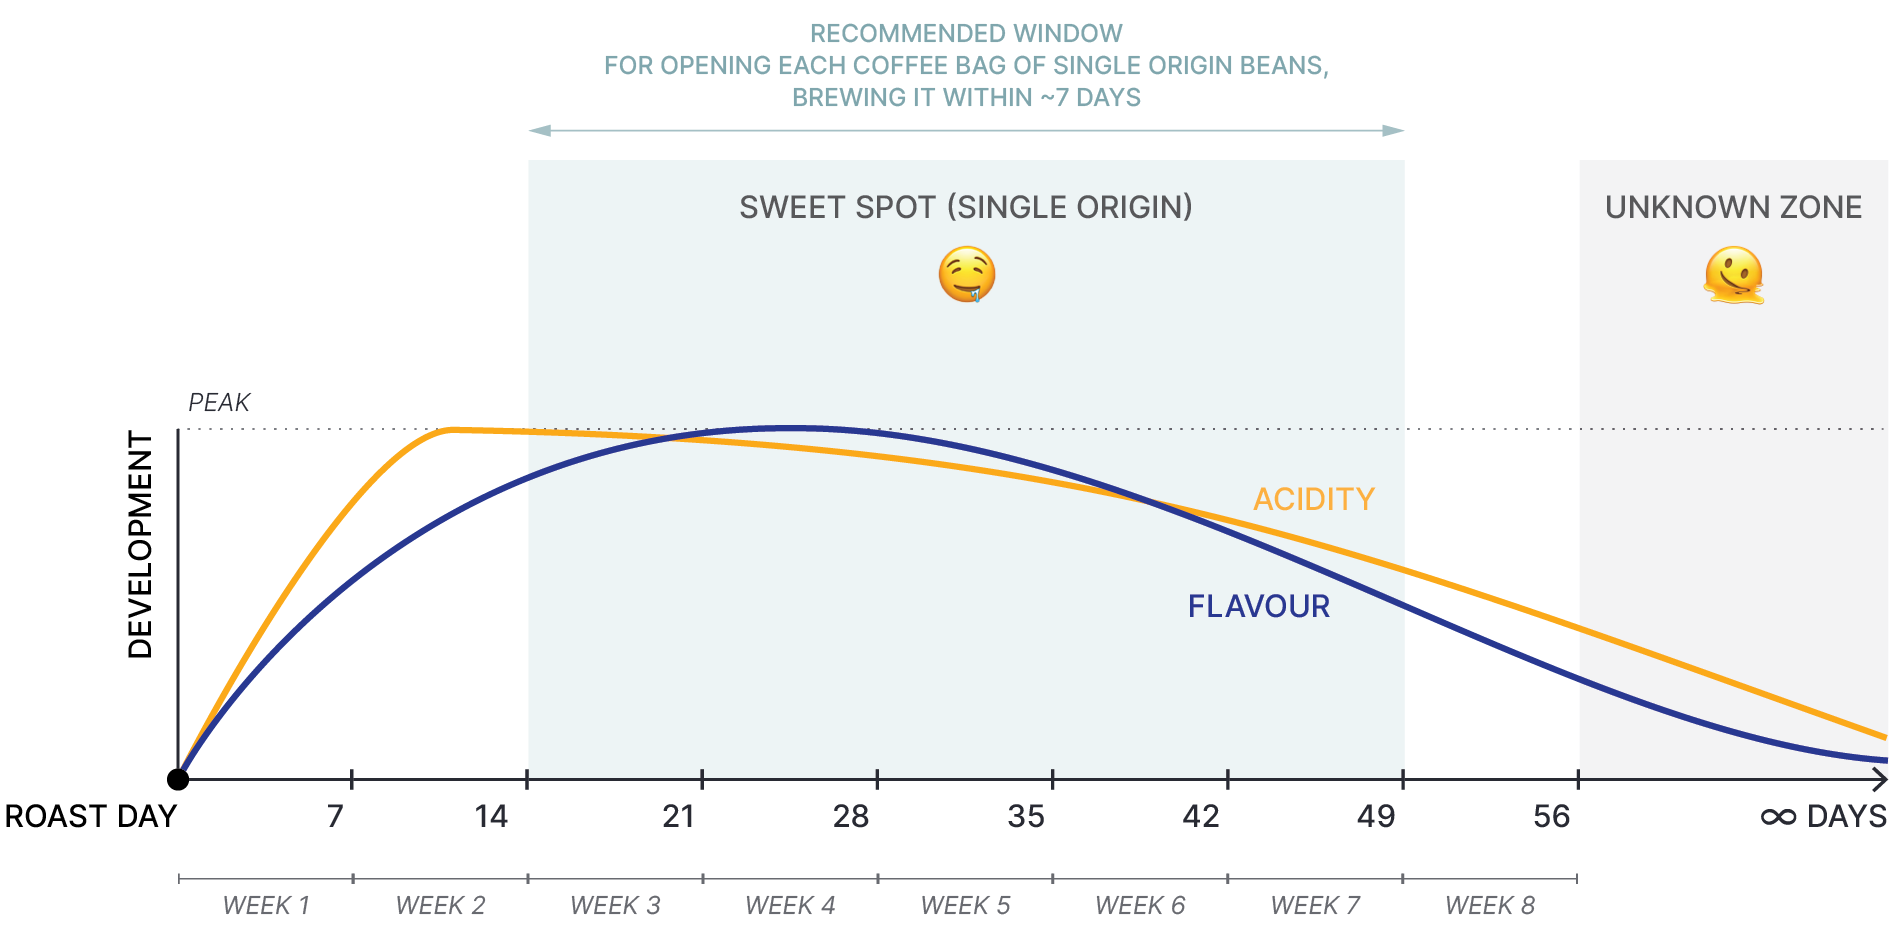 Graph showing the optimum brewing window for single origin whole beans, as described on text lines above.